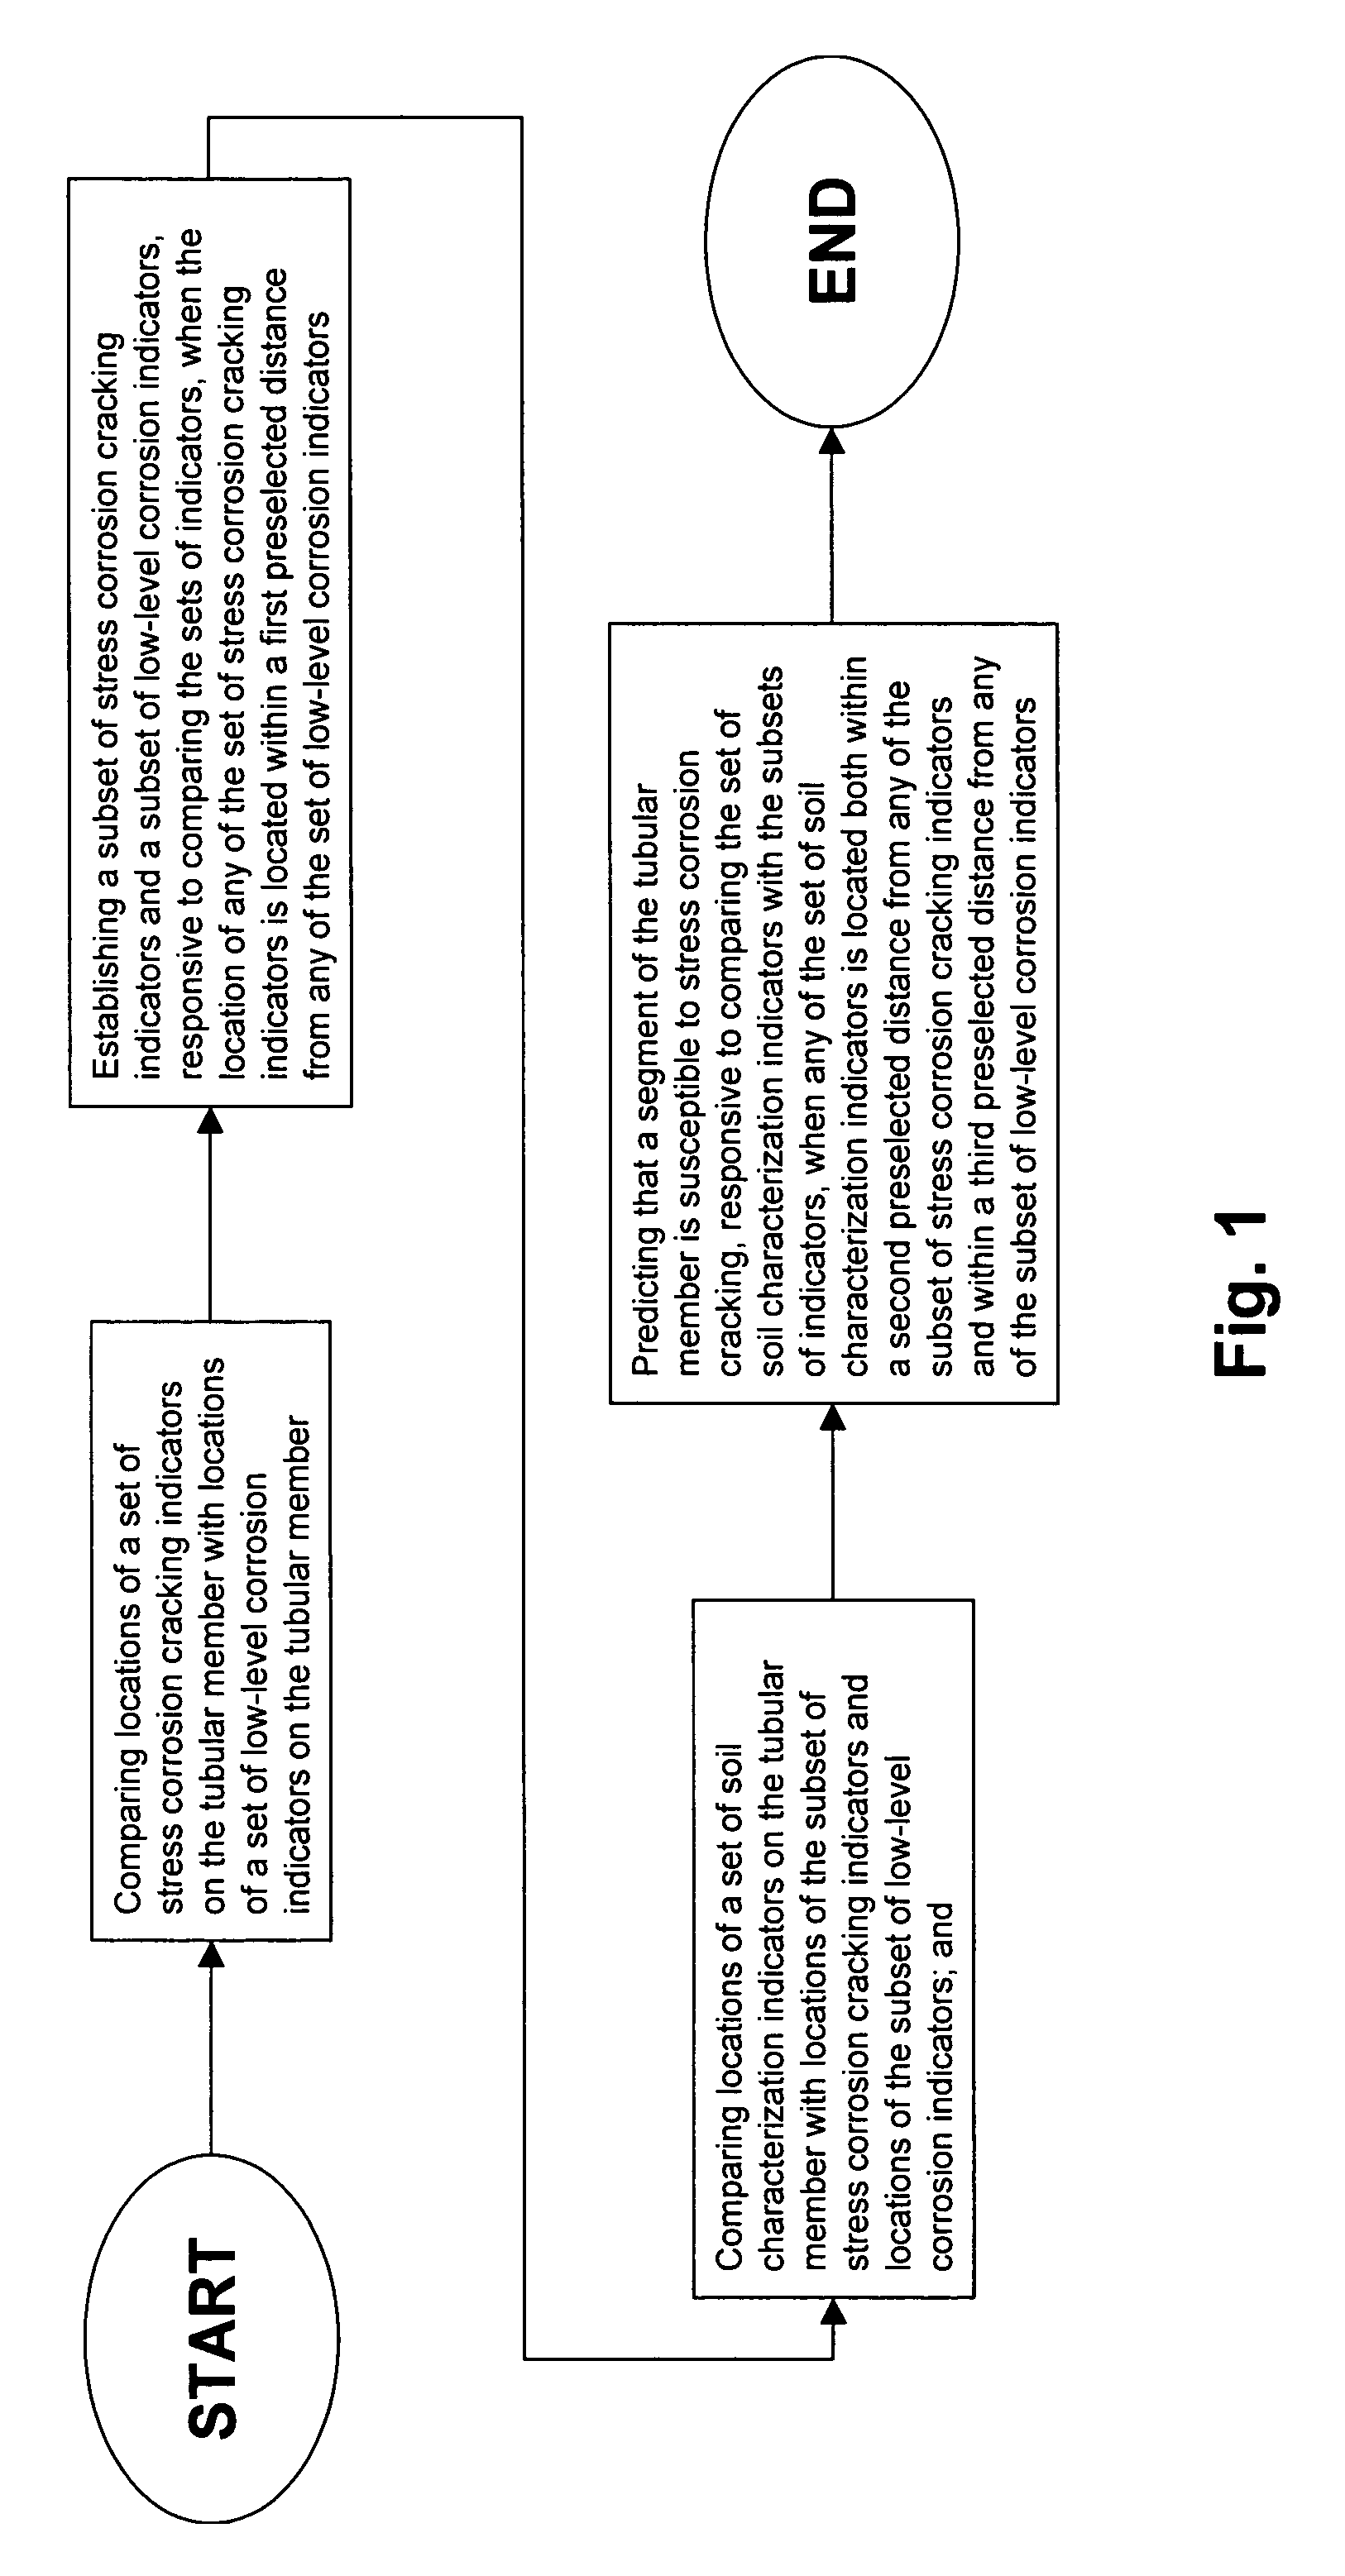 Method for detecting near neutral/low pH stress corrosion cracking in steel gas pipeline systems